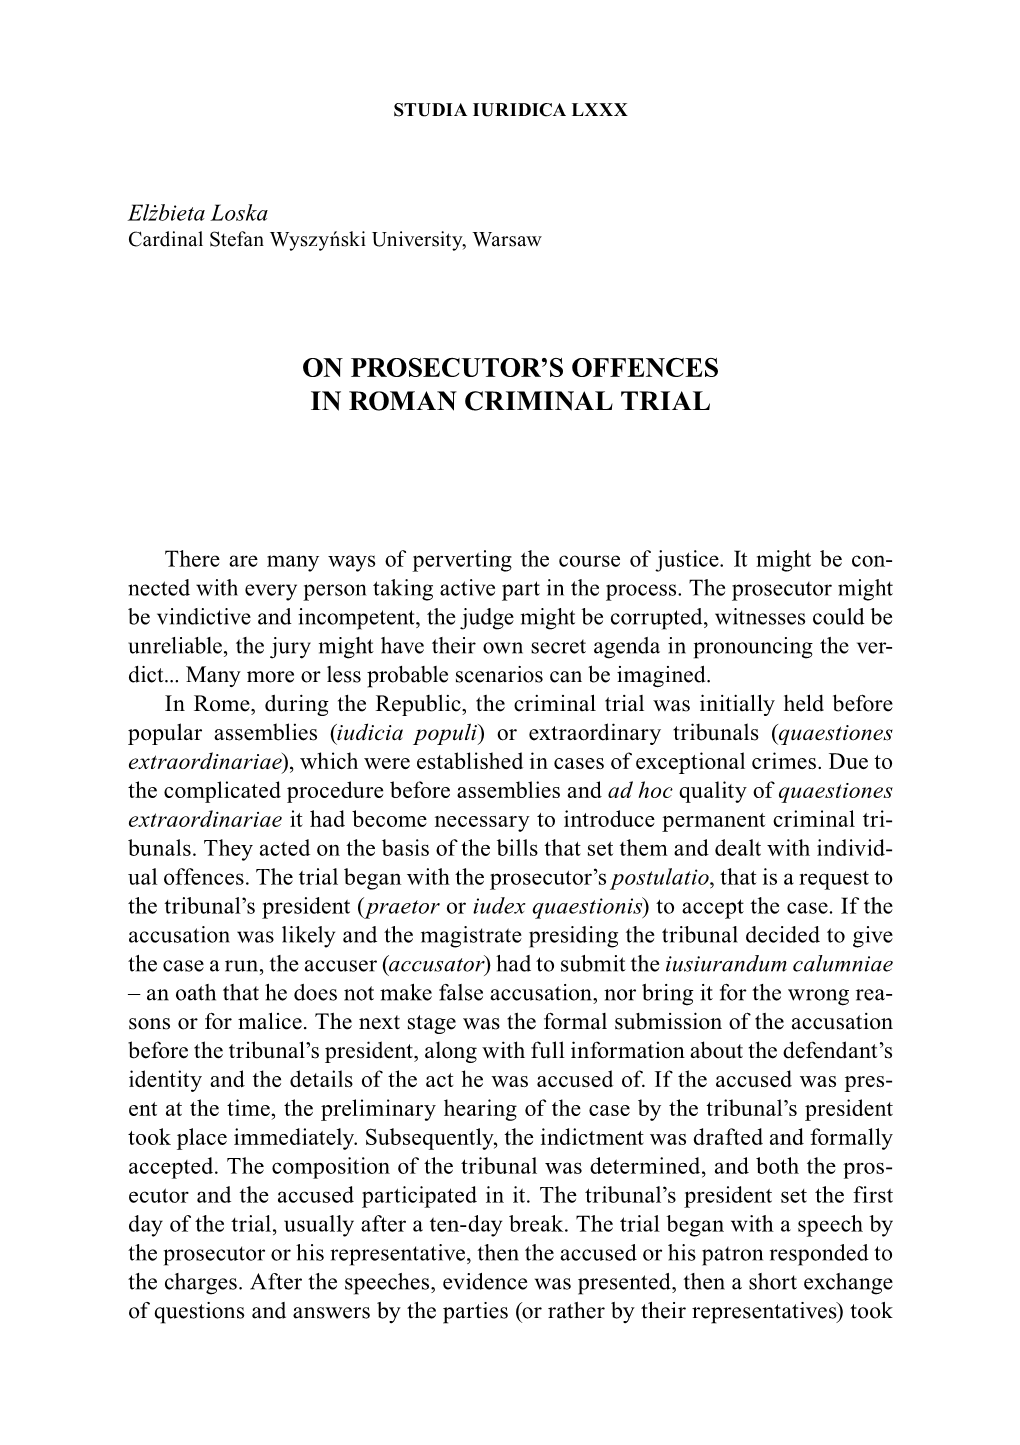 On Prosecutor's Offences in Roman Criminal Trial